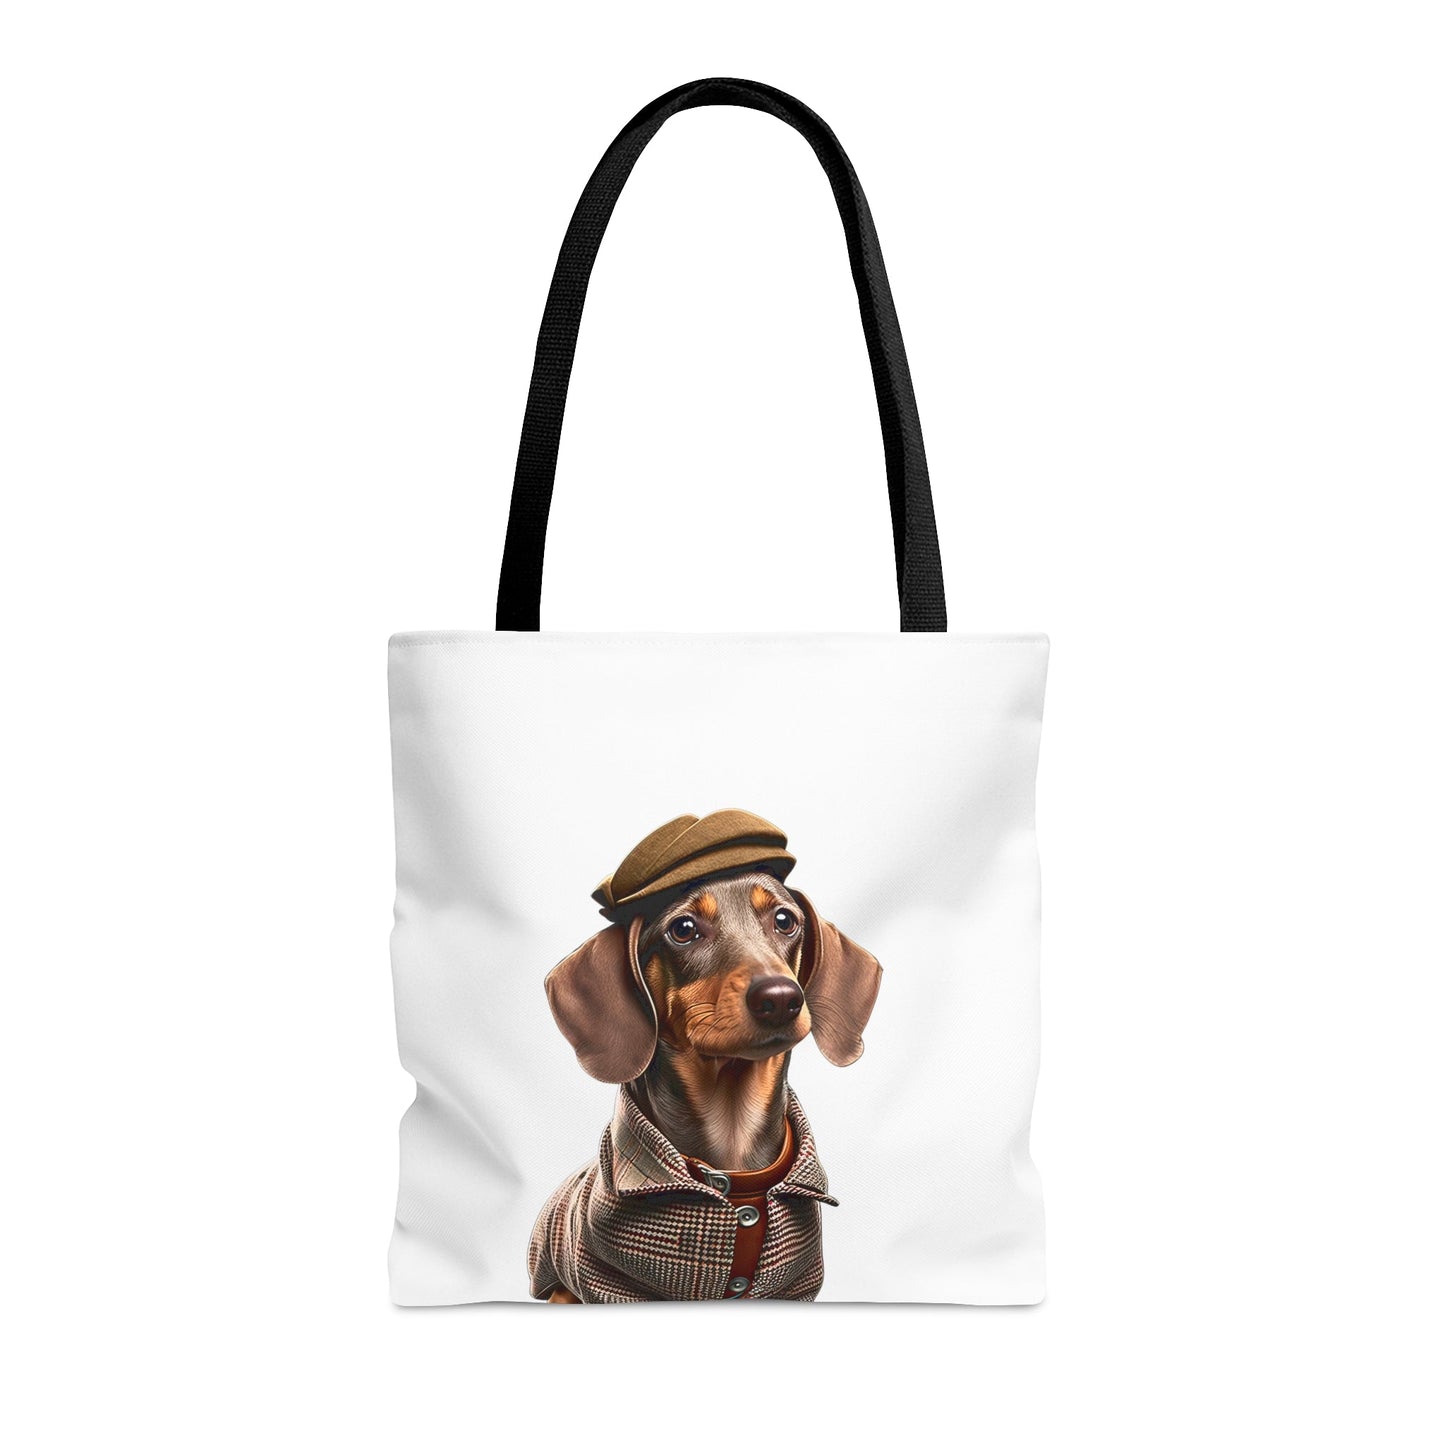 DONNY : Tote Bag - Shaggy Chic